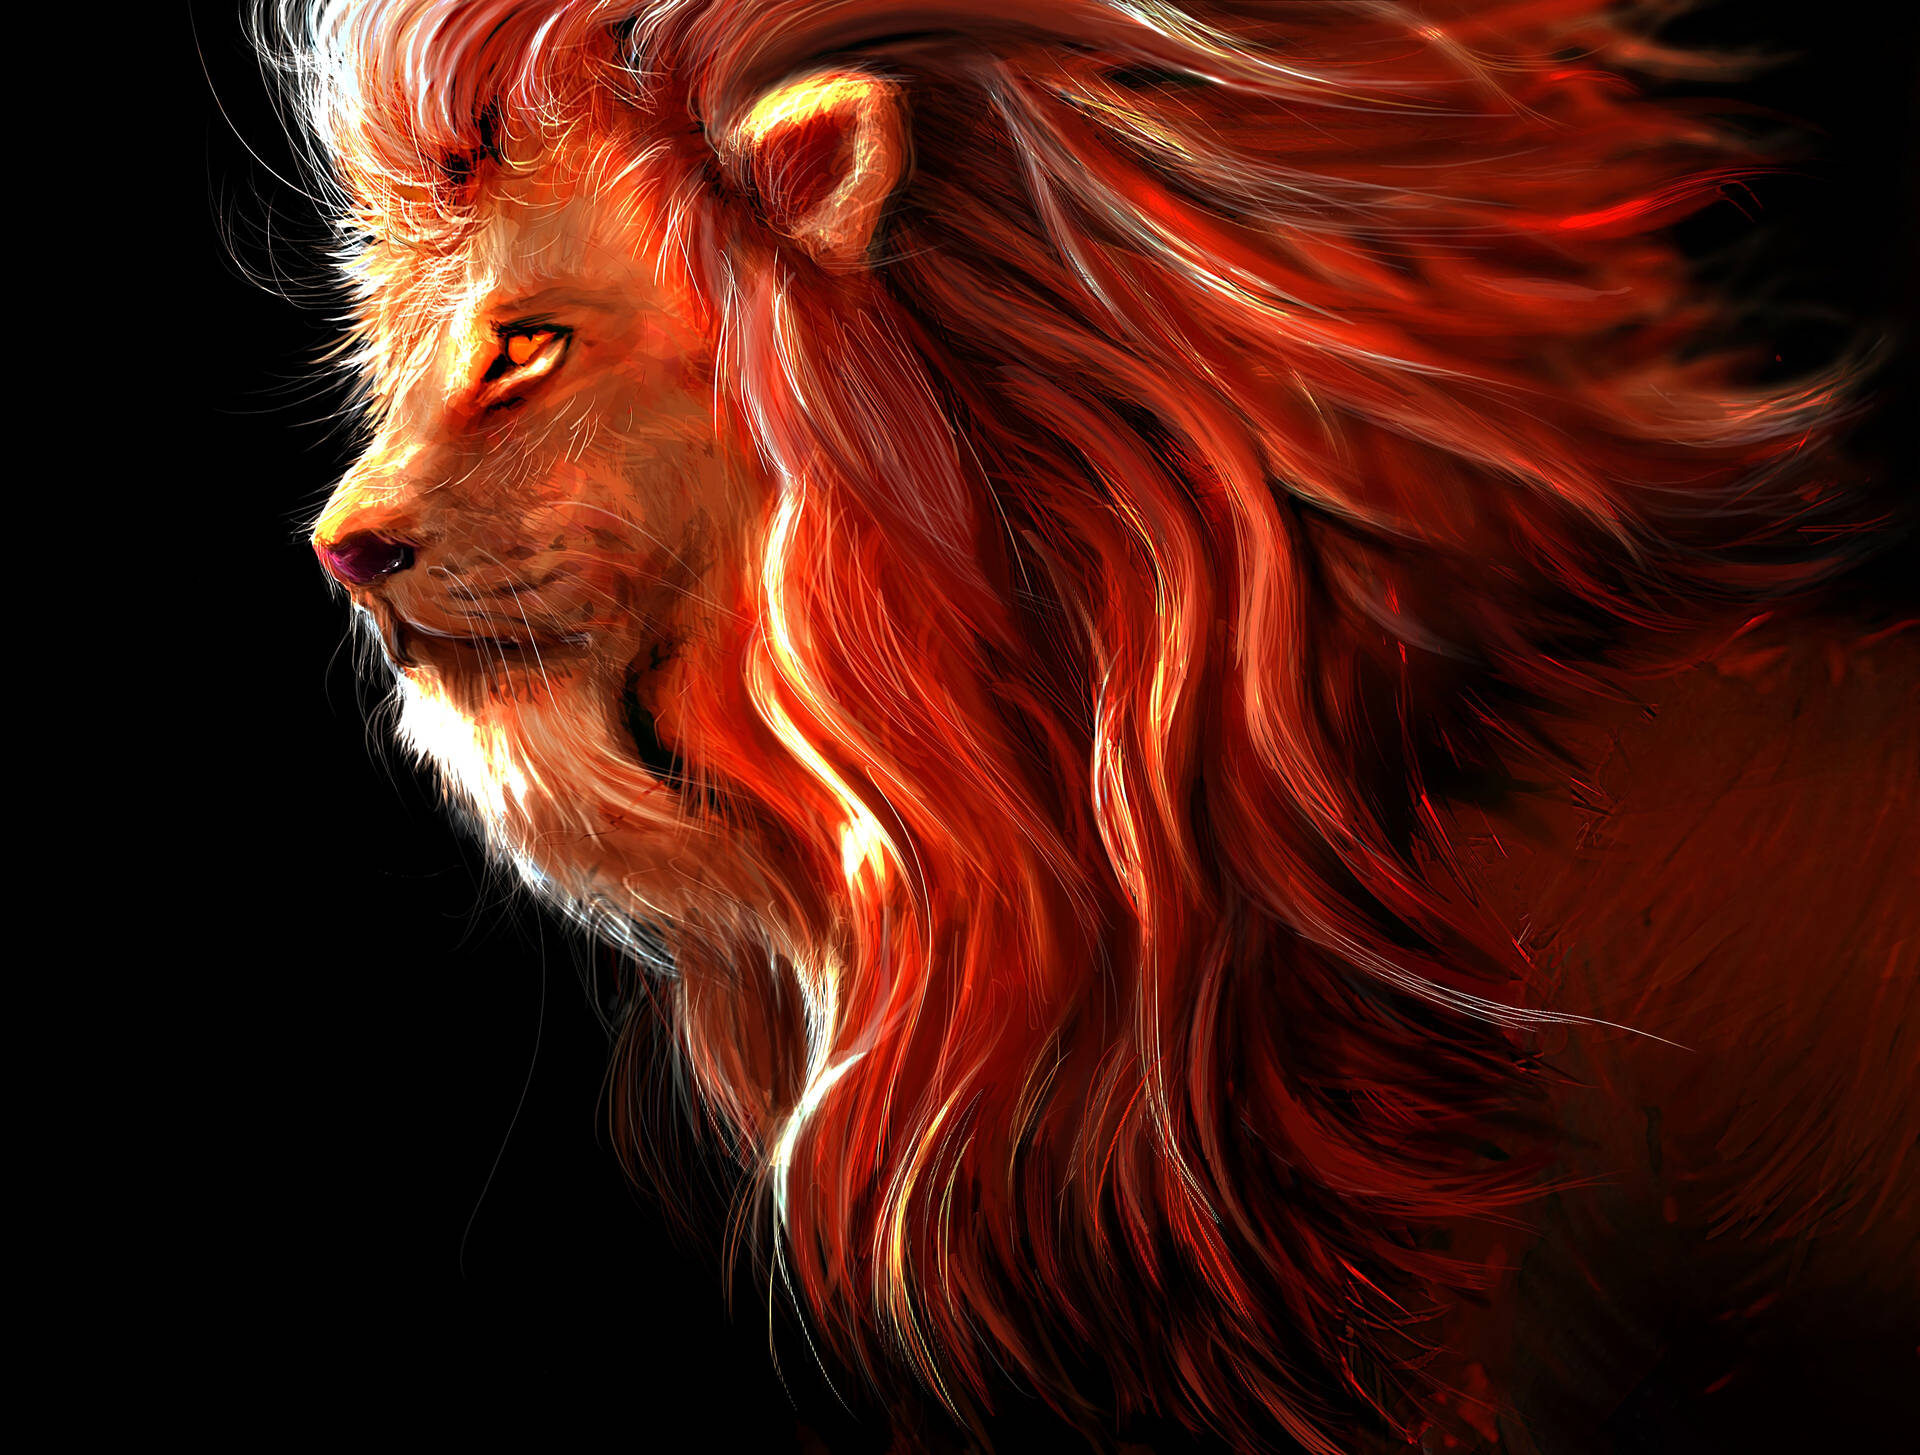 Majestic Blast of Colors in this Epic Red Lion King Painting Wallpaper